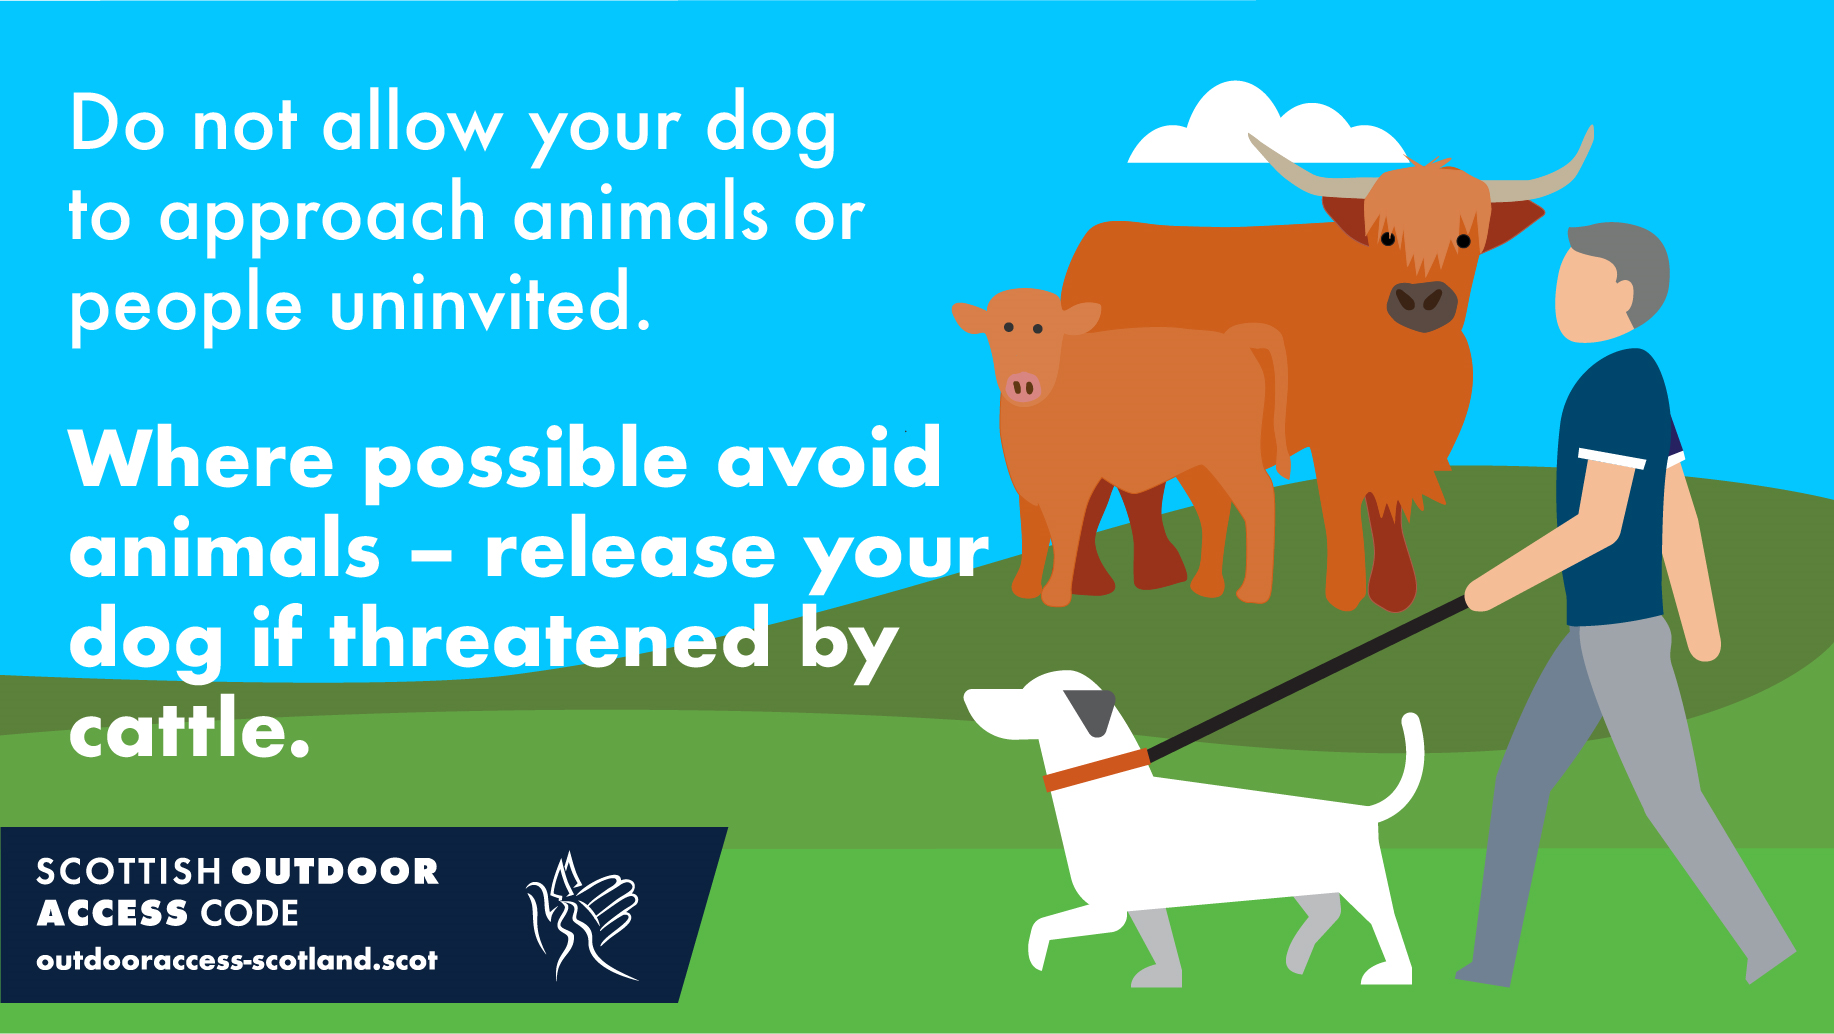 Do not allow your dog to approach animals or people uninvited. Where possible avoid fields with animals. If threatened by Cattle, release lead for quick escape.